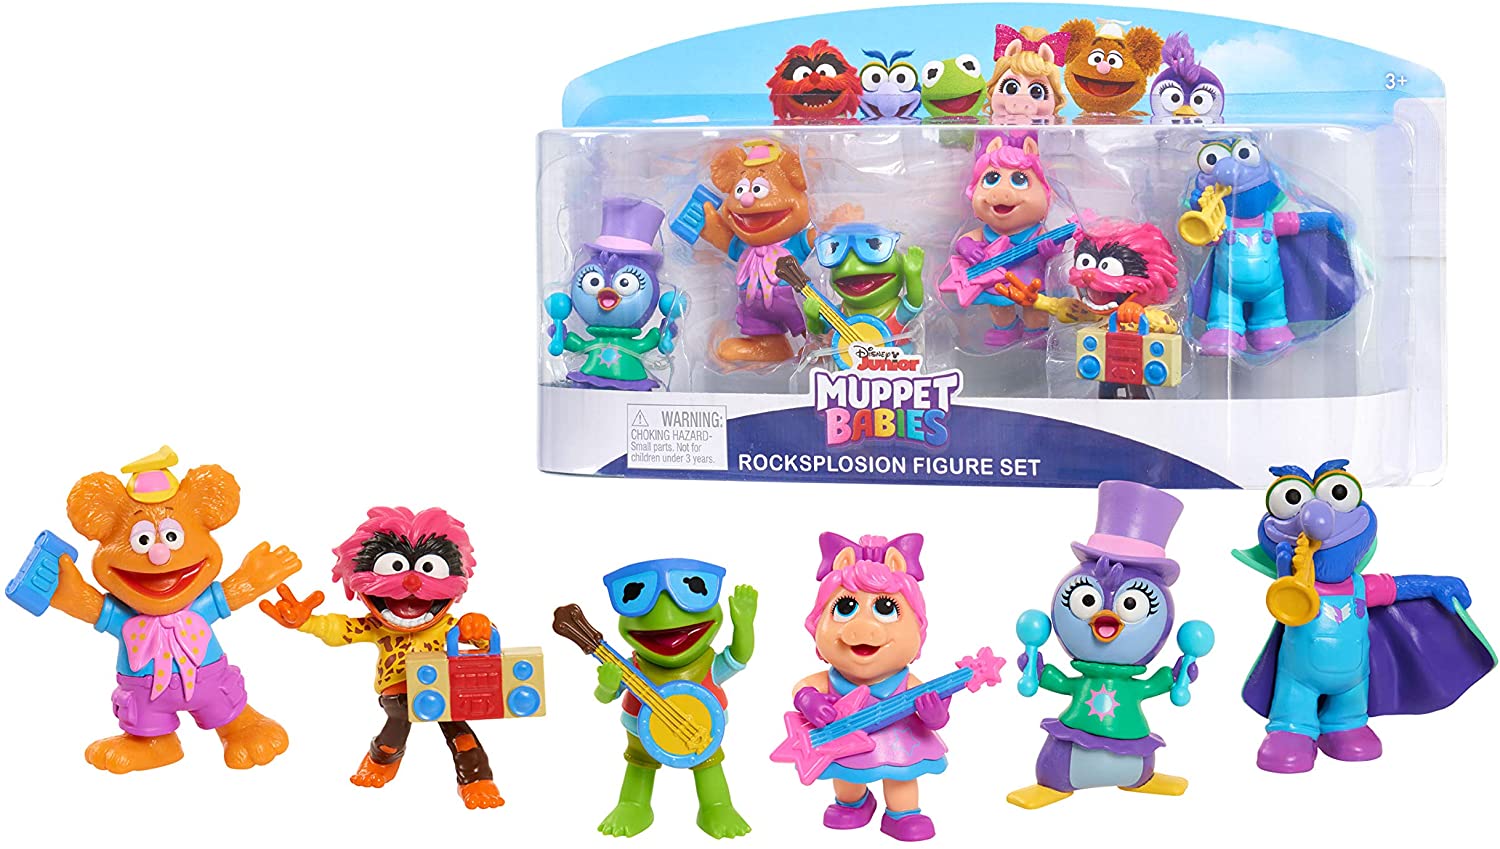 6-Pack Muppet Babies Rocksplosion Figure Set $7.50 + Free Shipping w/ Amazon Prime or Orders $25+